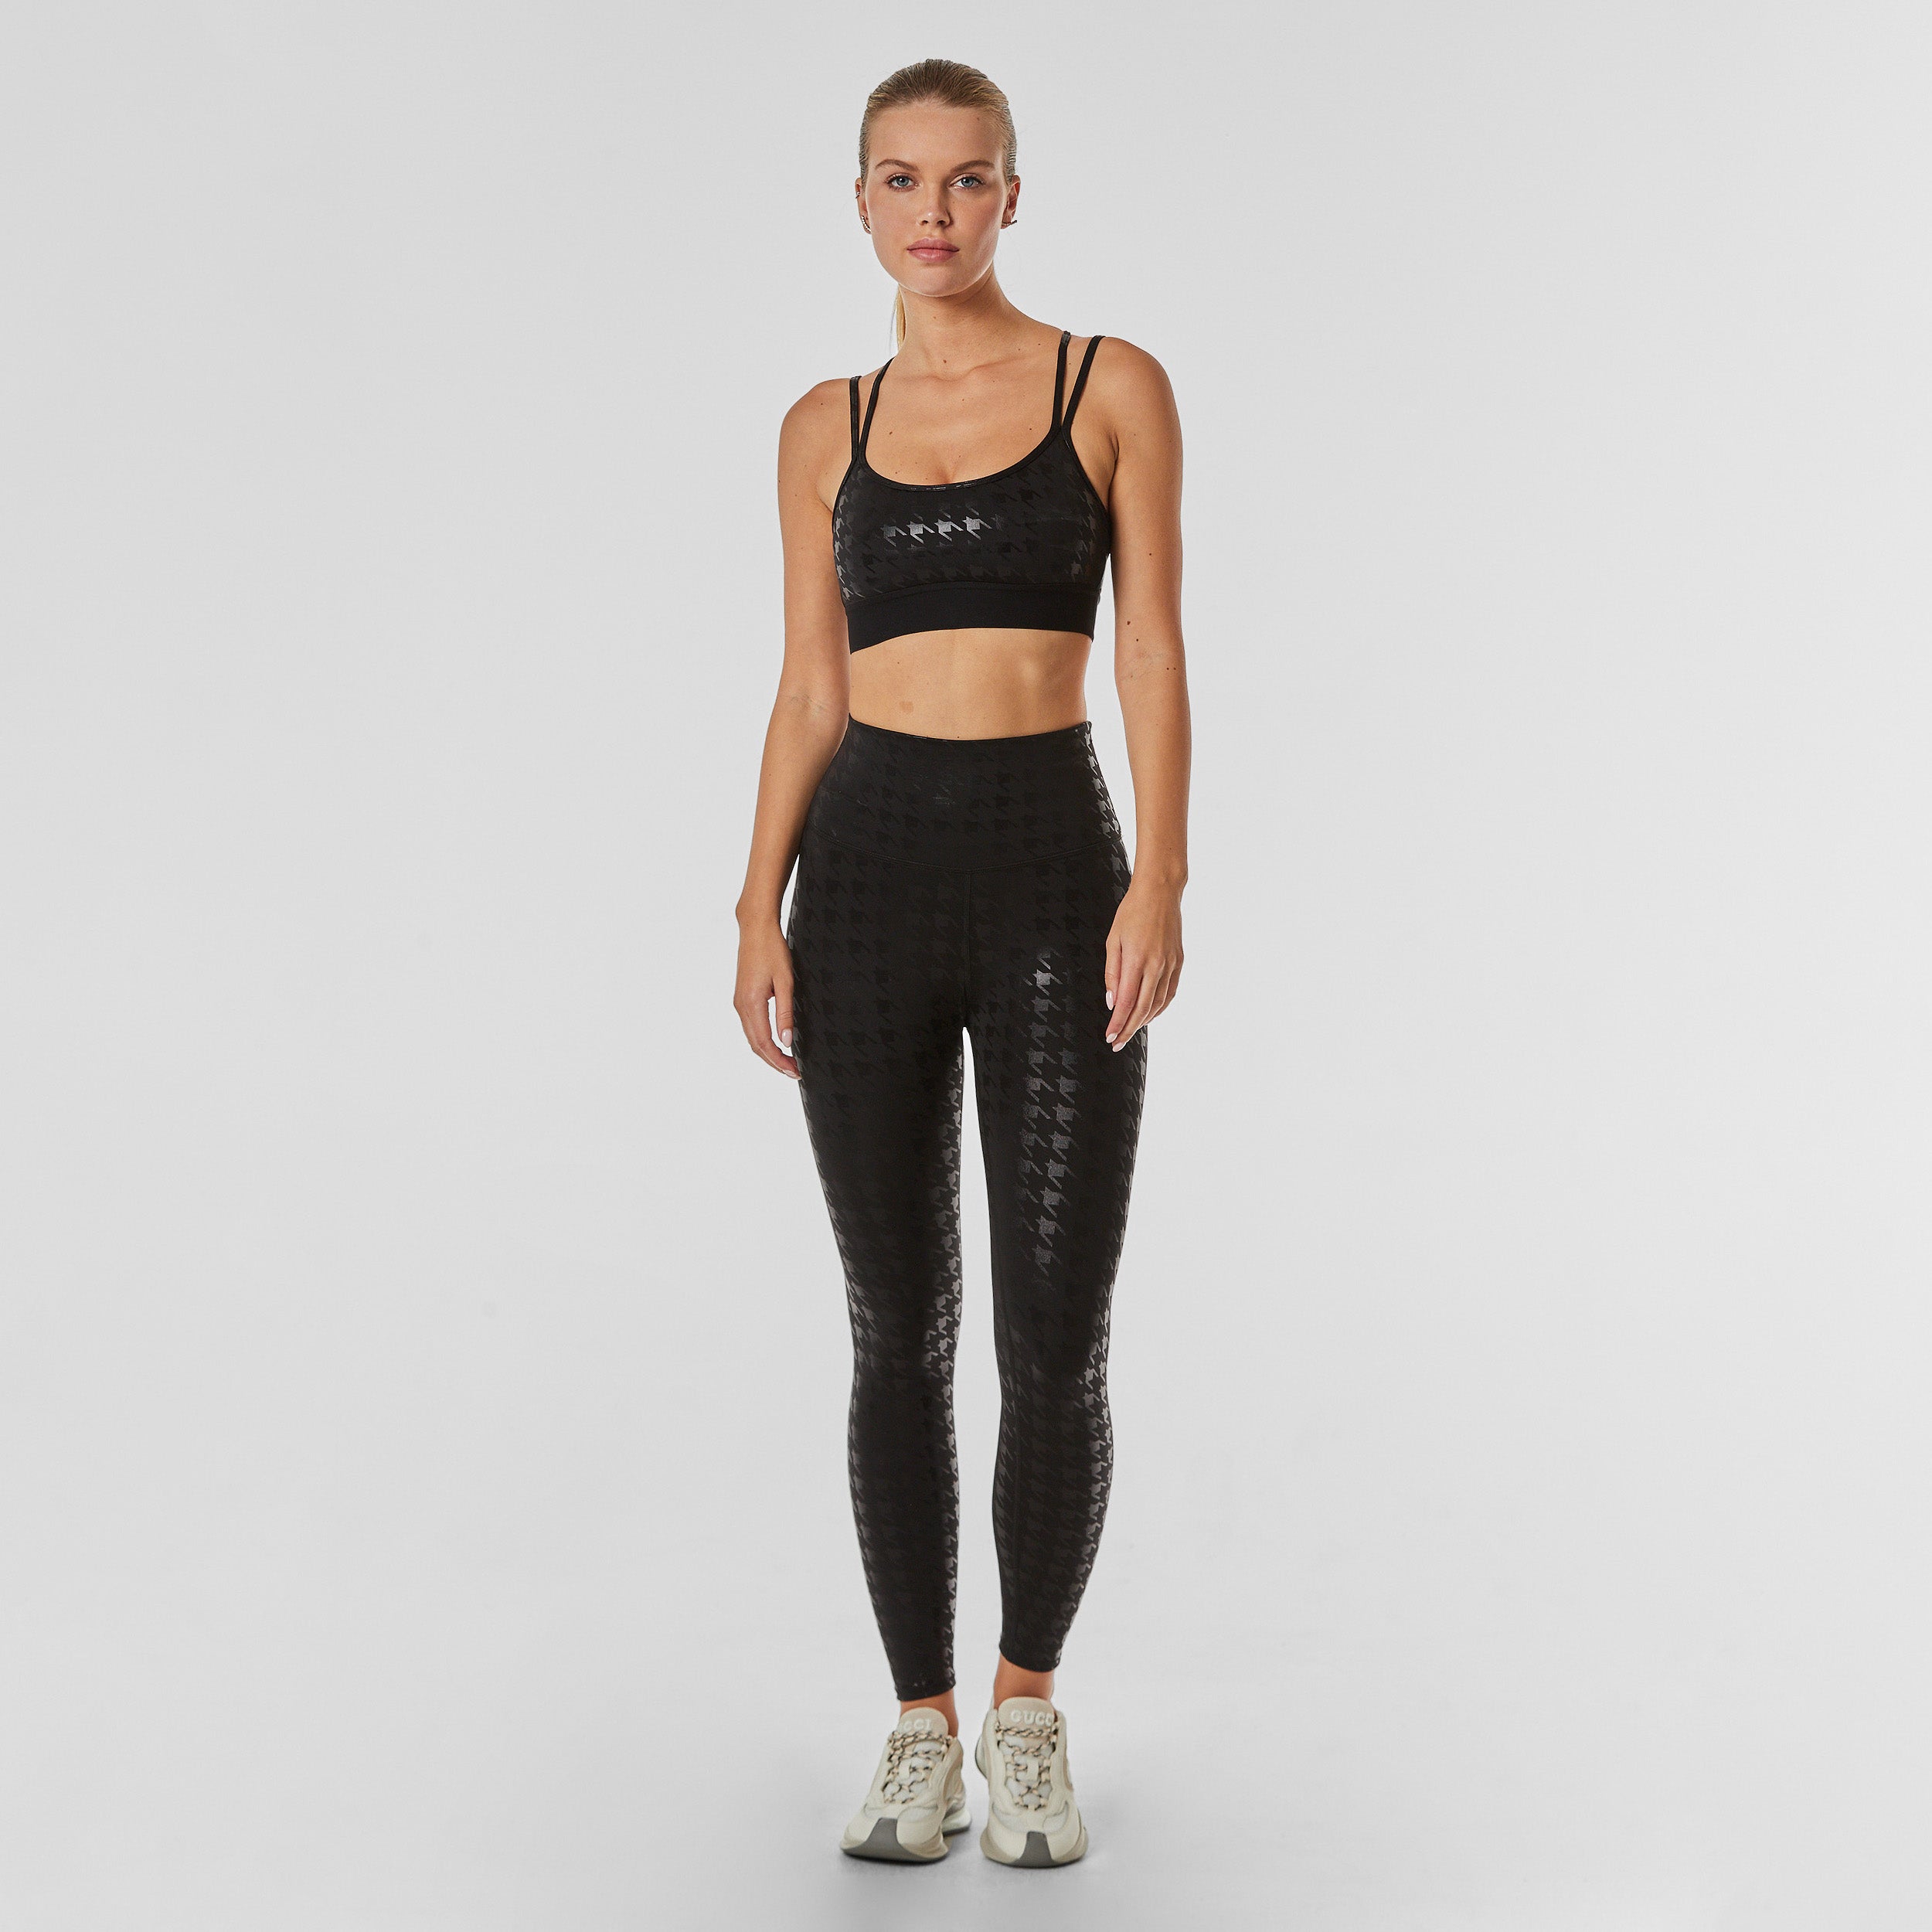 Full body view of woman wearing black on black glossy houndstooth patterned legging and matching bra